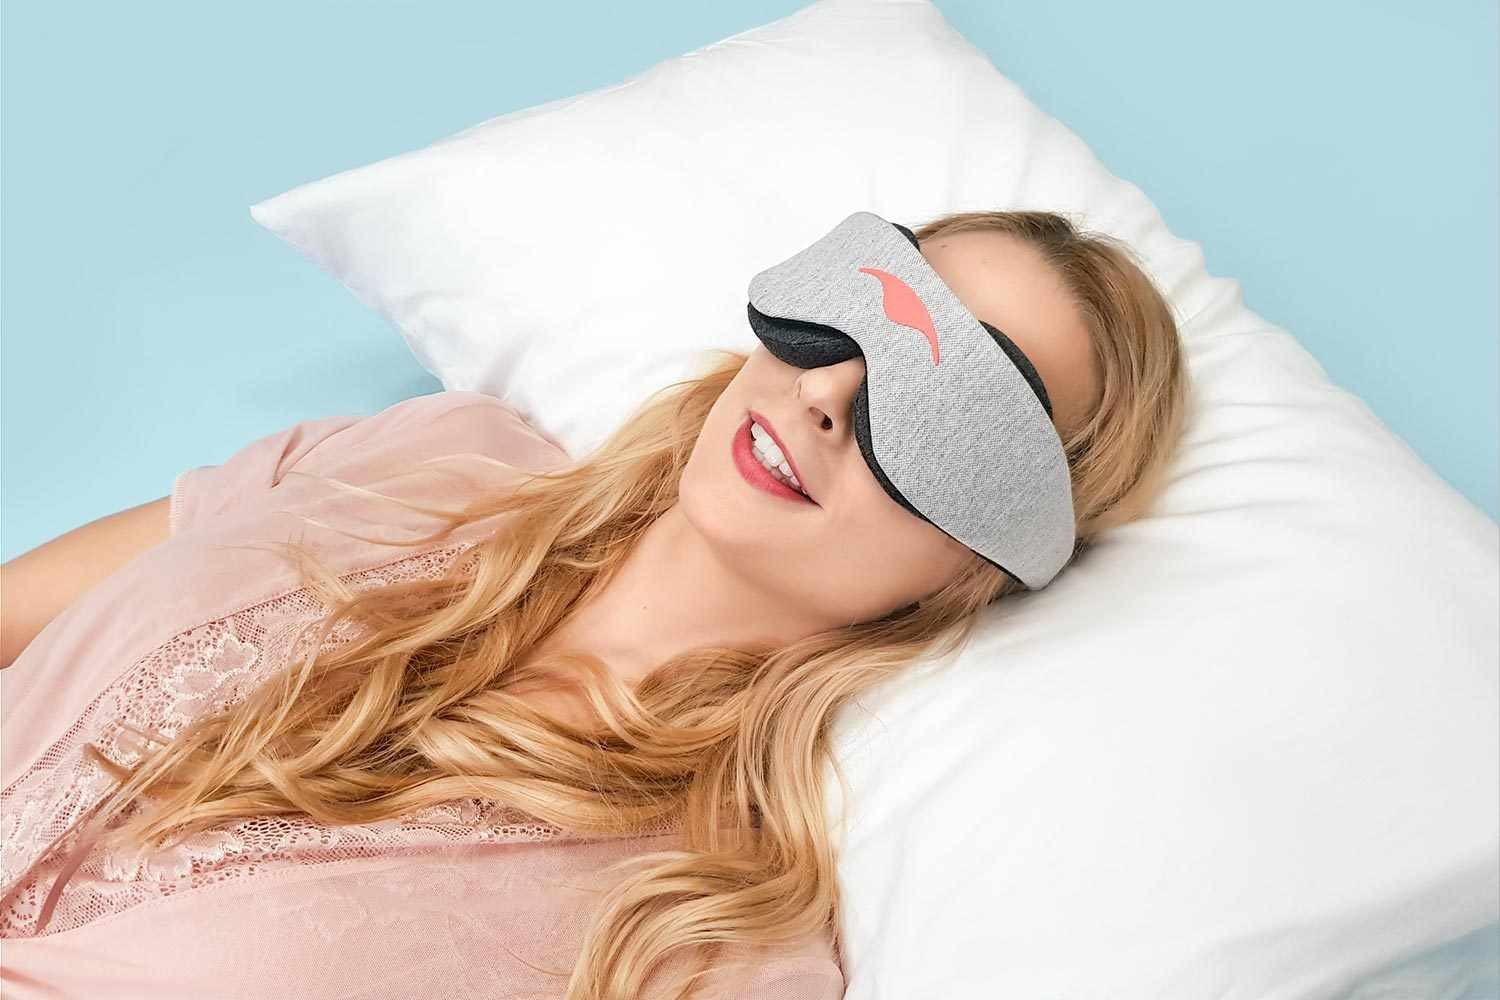 A girl lying in bed with a sleep mask that blocks out light.